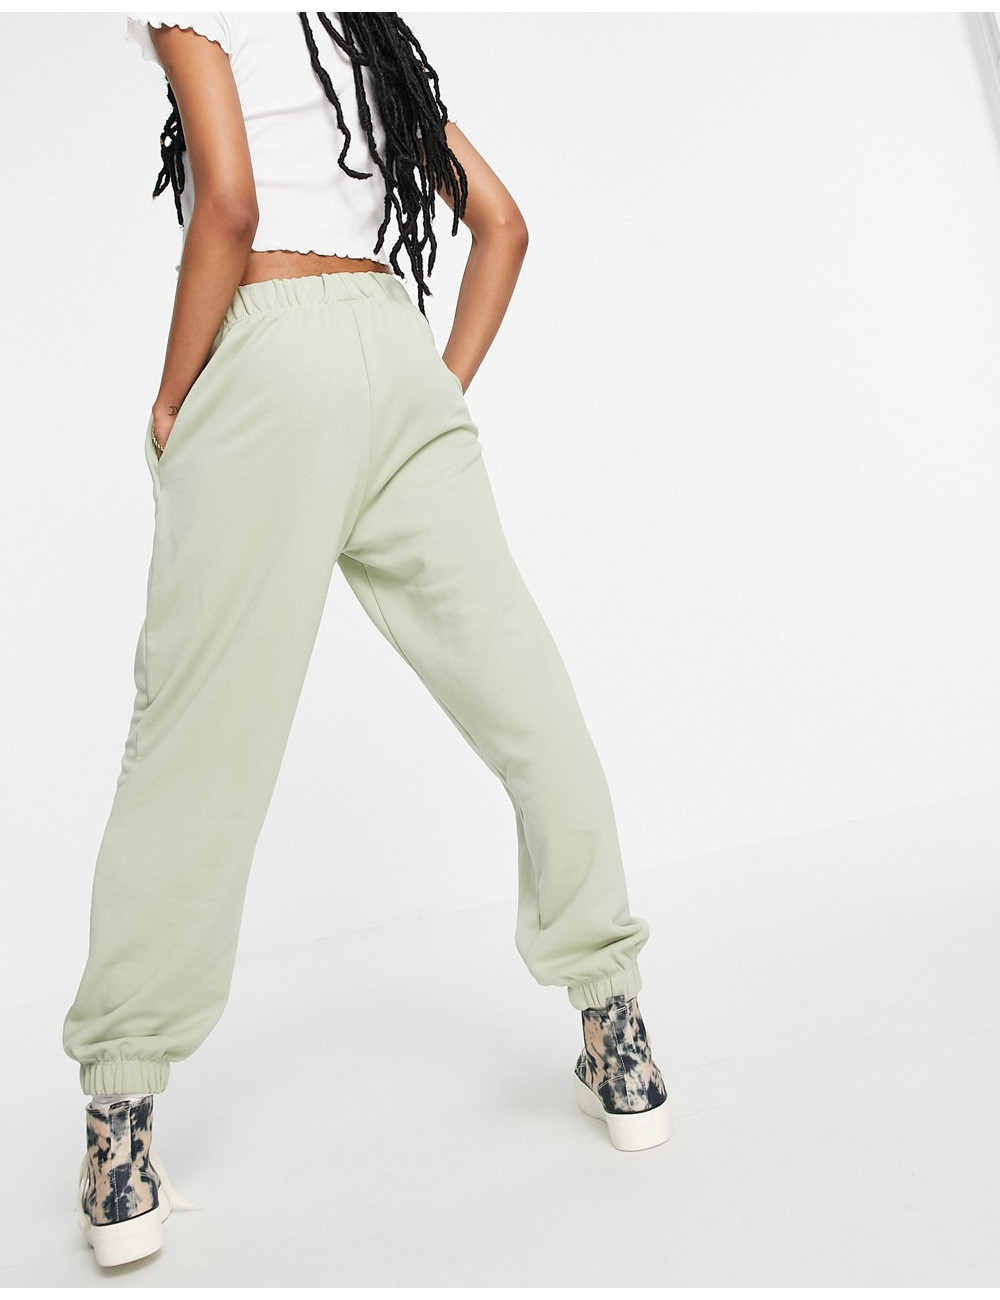 Only jogger co-ord in sage